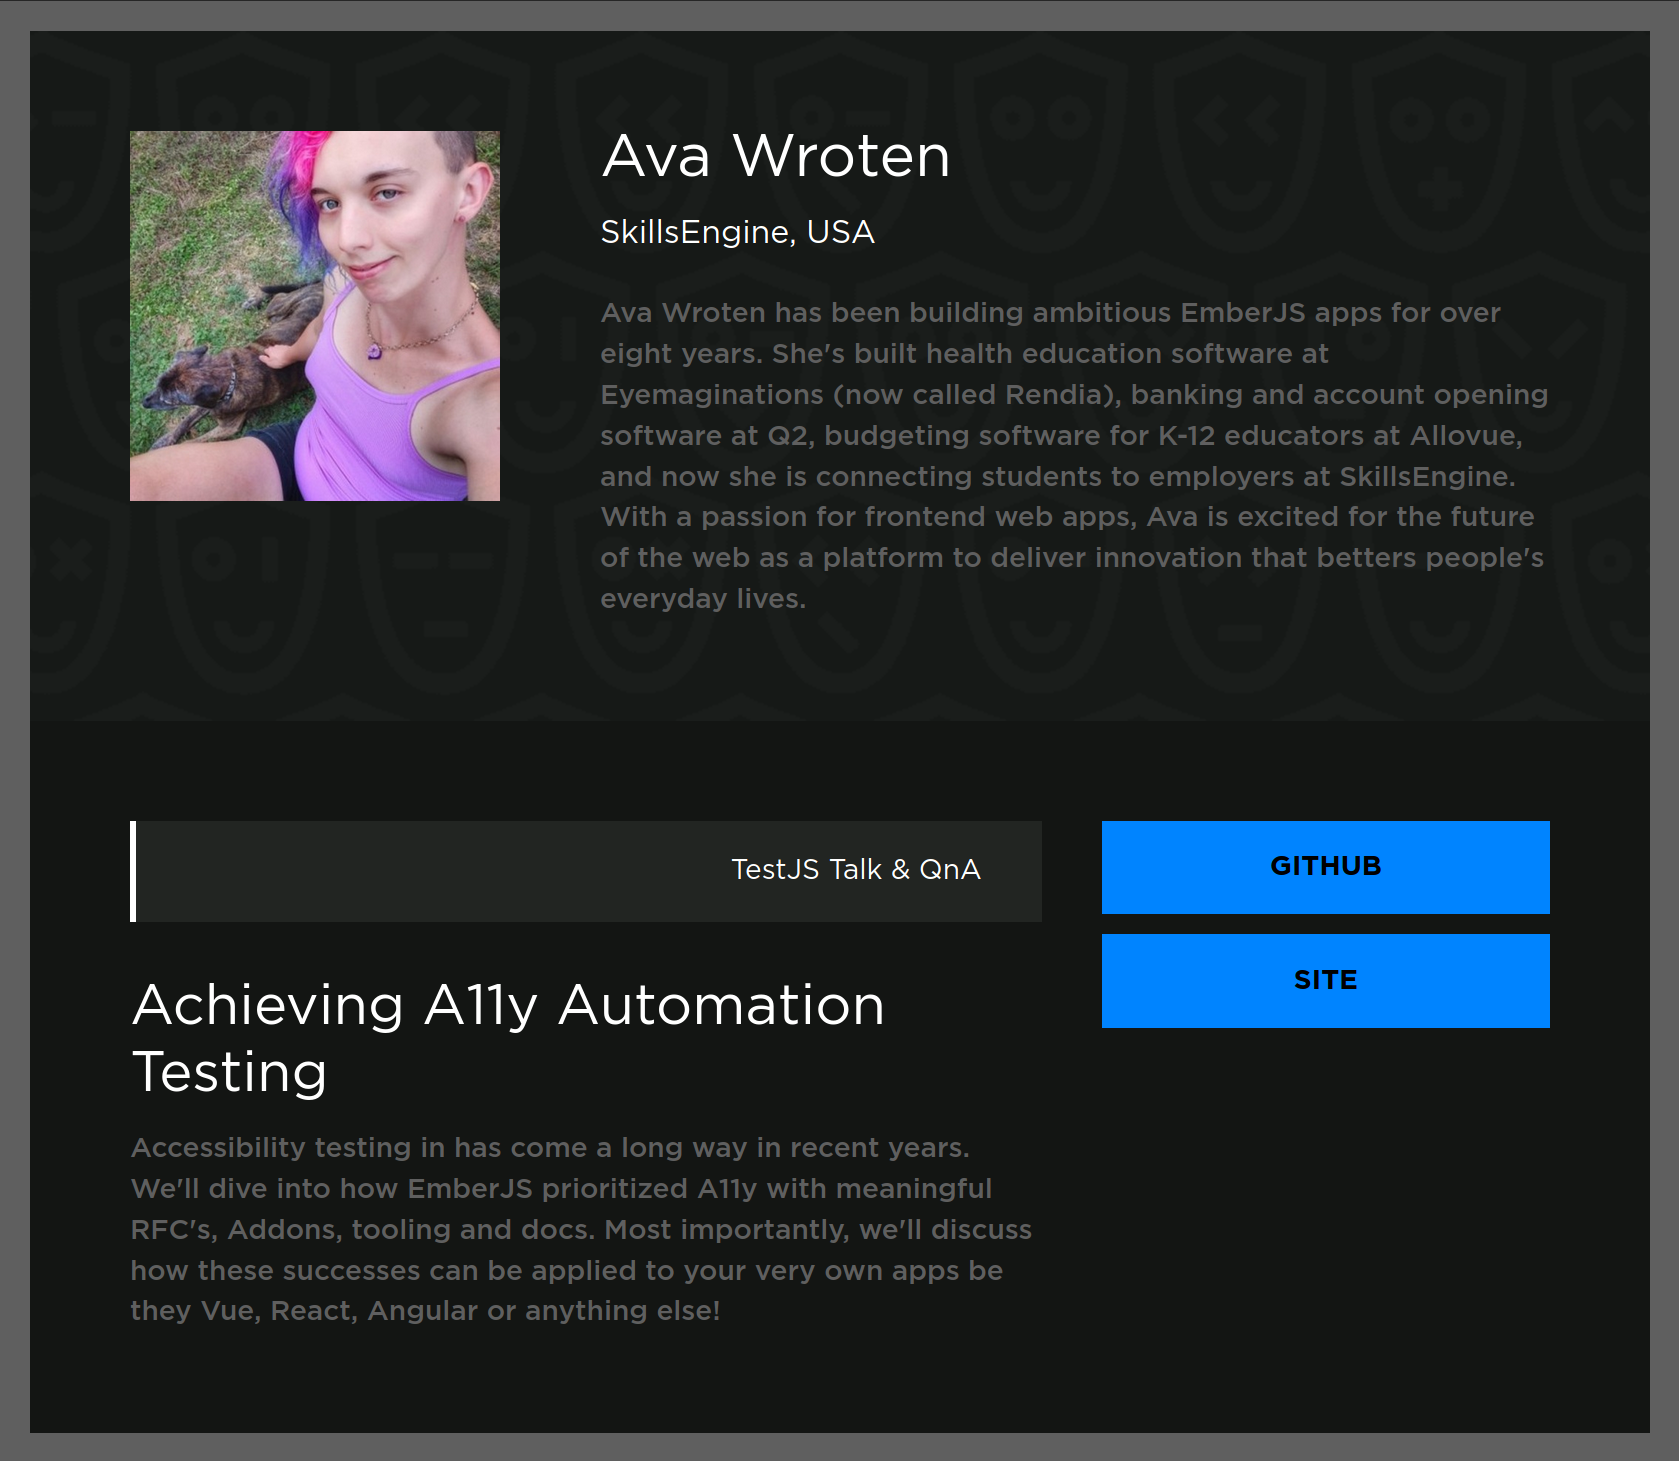 Achieving A11y Automation Testing: Accessibility testing in has come a long way in recent years. We'll dive into how EmberJS prioritized A11y with meaningful RFC's, Addons, tooling and docs. Most importantly, we'll discuss how these successes can be applied to your very own apps be they Vue, React, Angular or anything else!